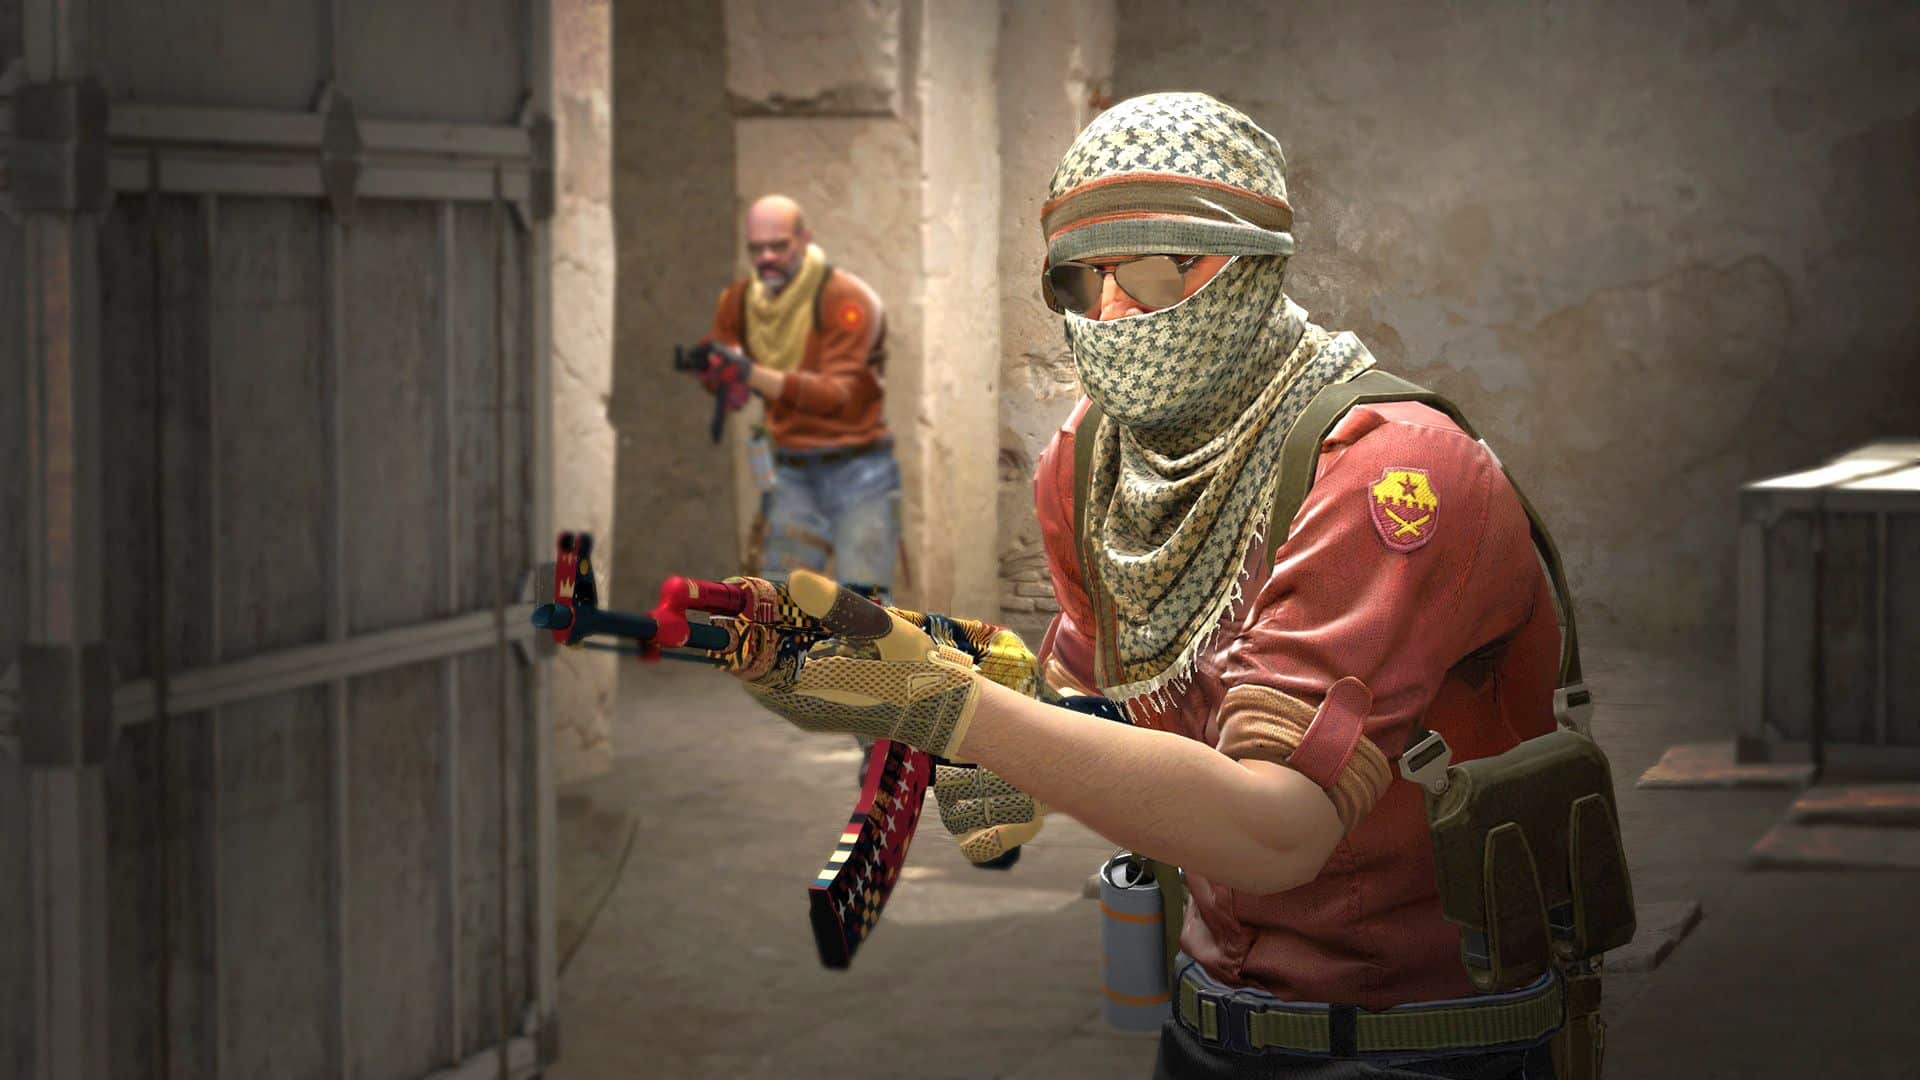 Experimental Vulkan support is here for Counter-Strike: Global Offensive